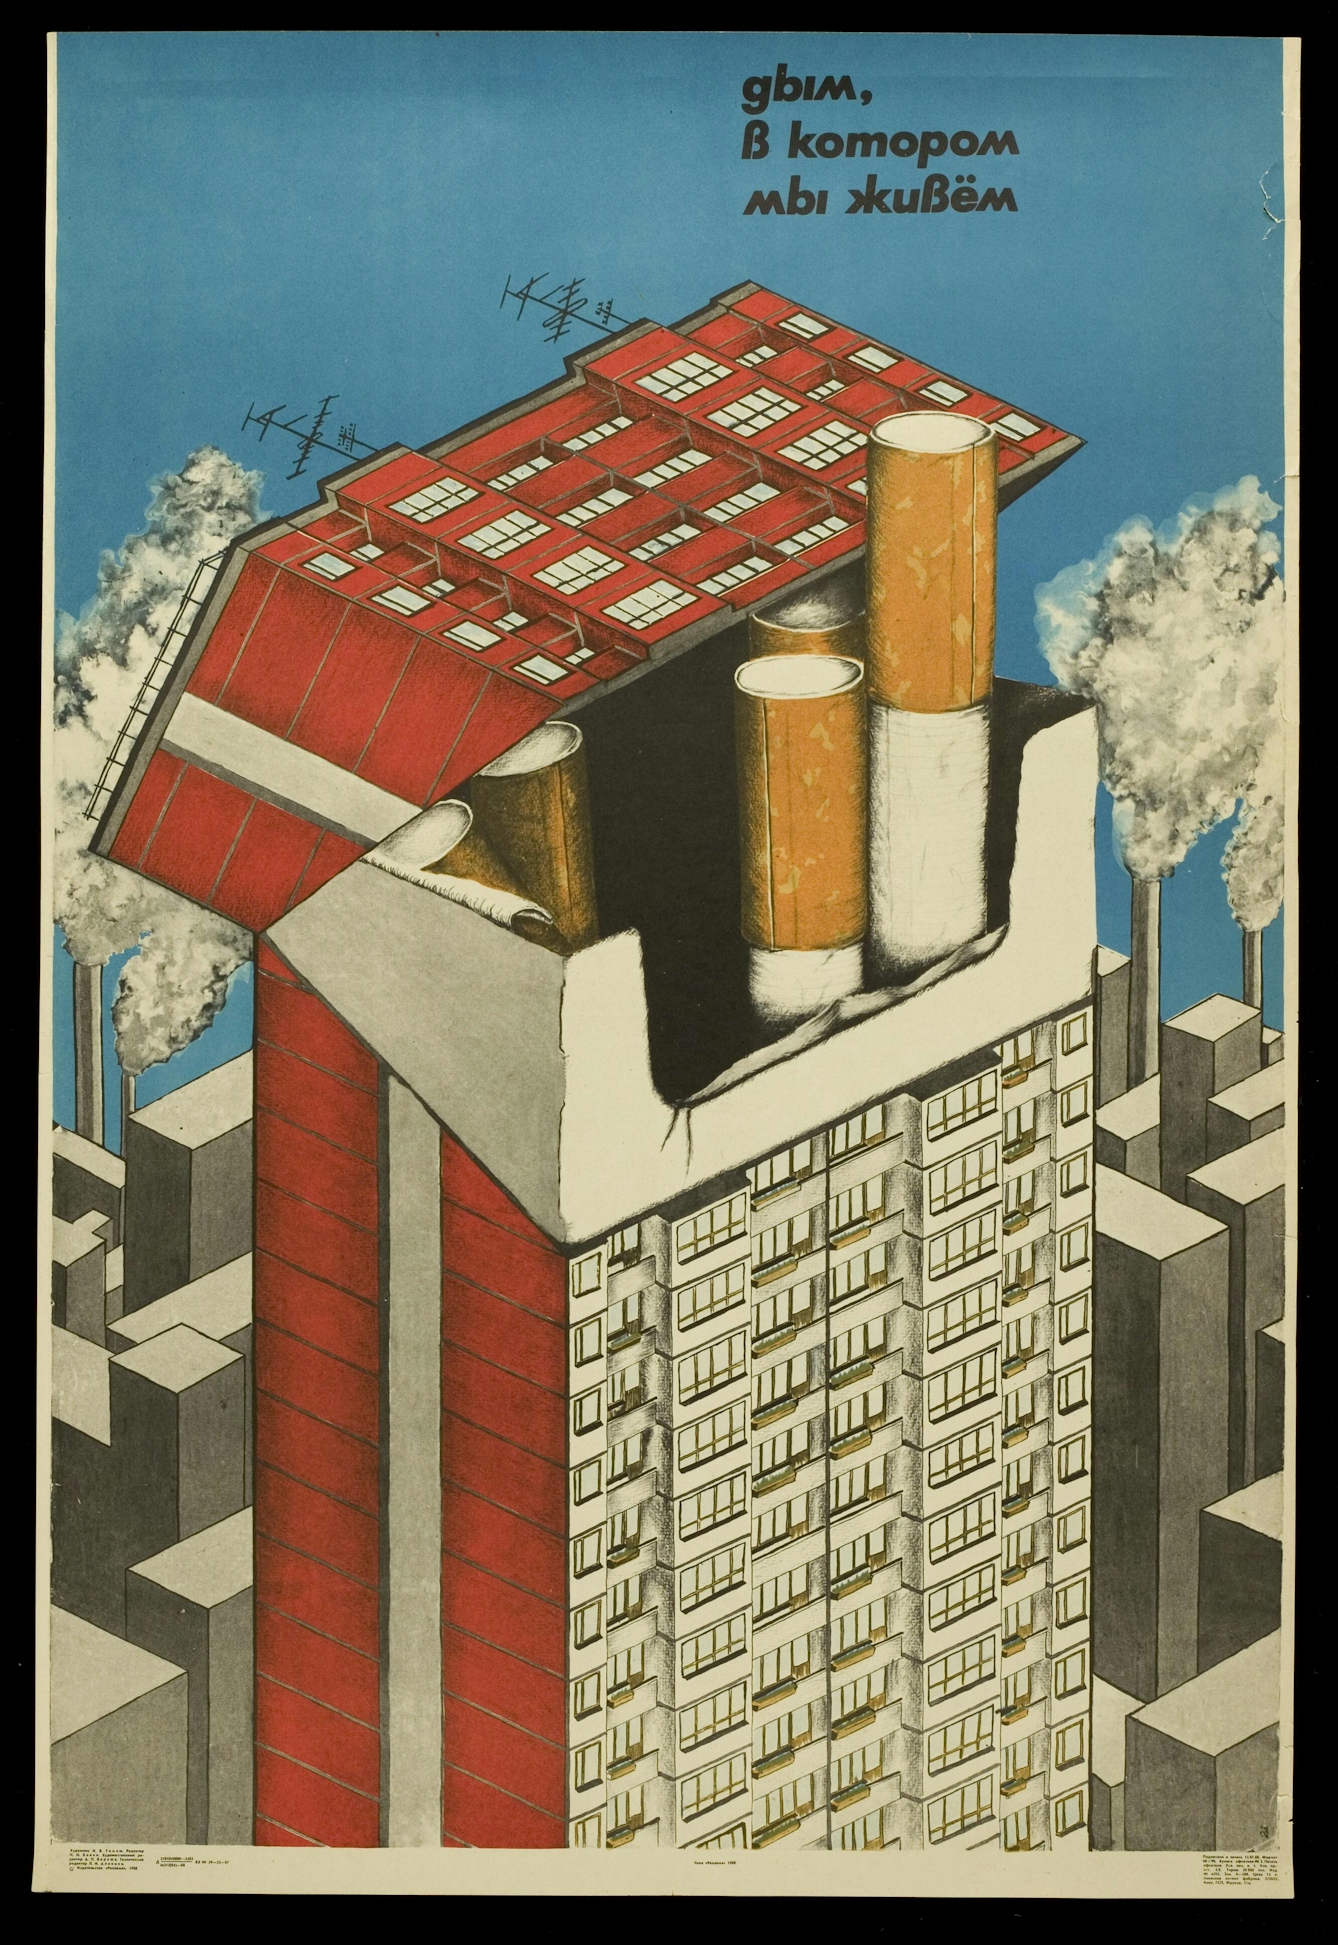 A colour illustration featuring a red and grey block of flats set against a sky-blue background. The building is flipped open at the top like a cigarette packet, and there are several enormous cigarettes inside. The building/packet is surrounded by grey factories with smoking chimneys. 